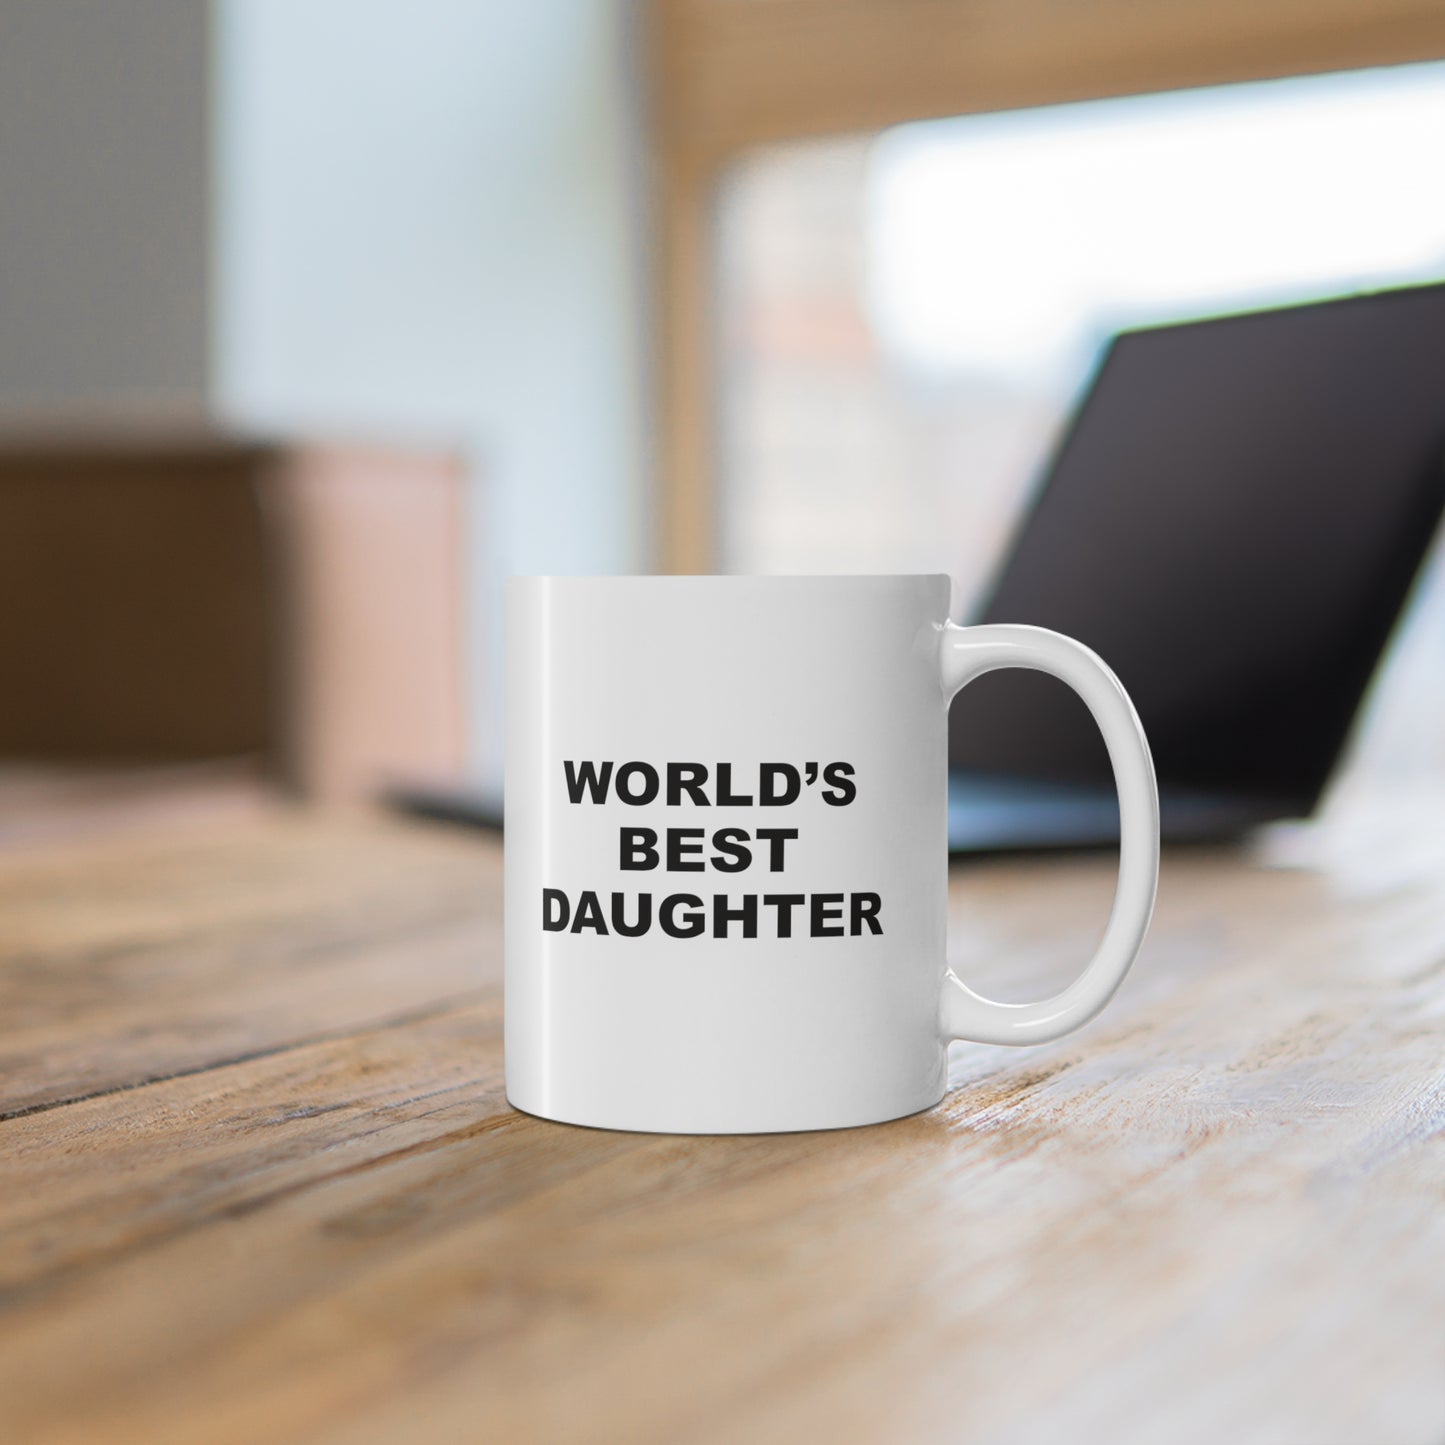 11oz ceramic mug with quote World's Best Daughter